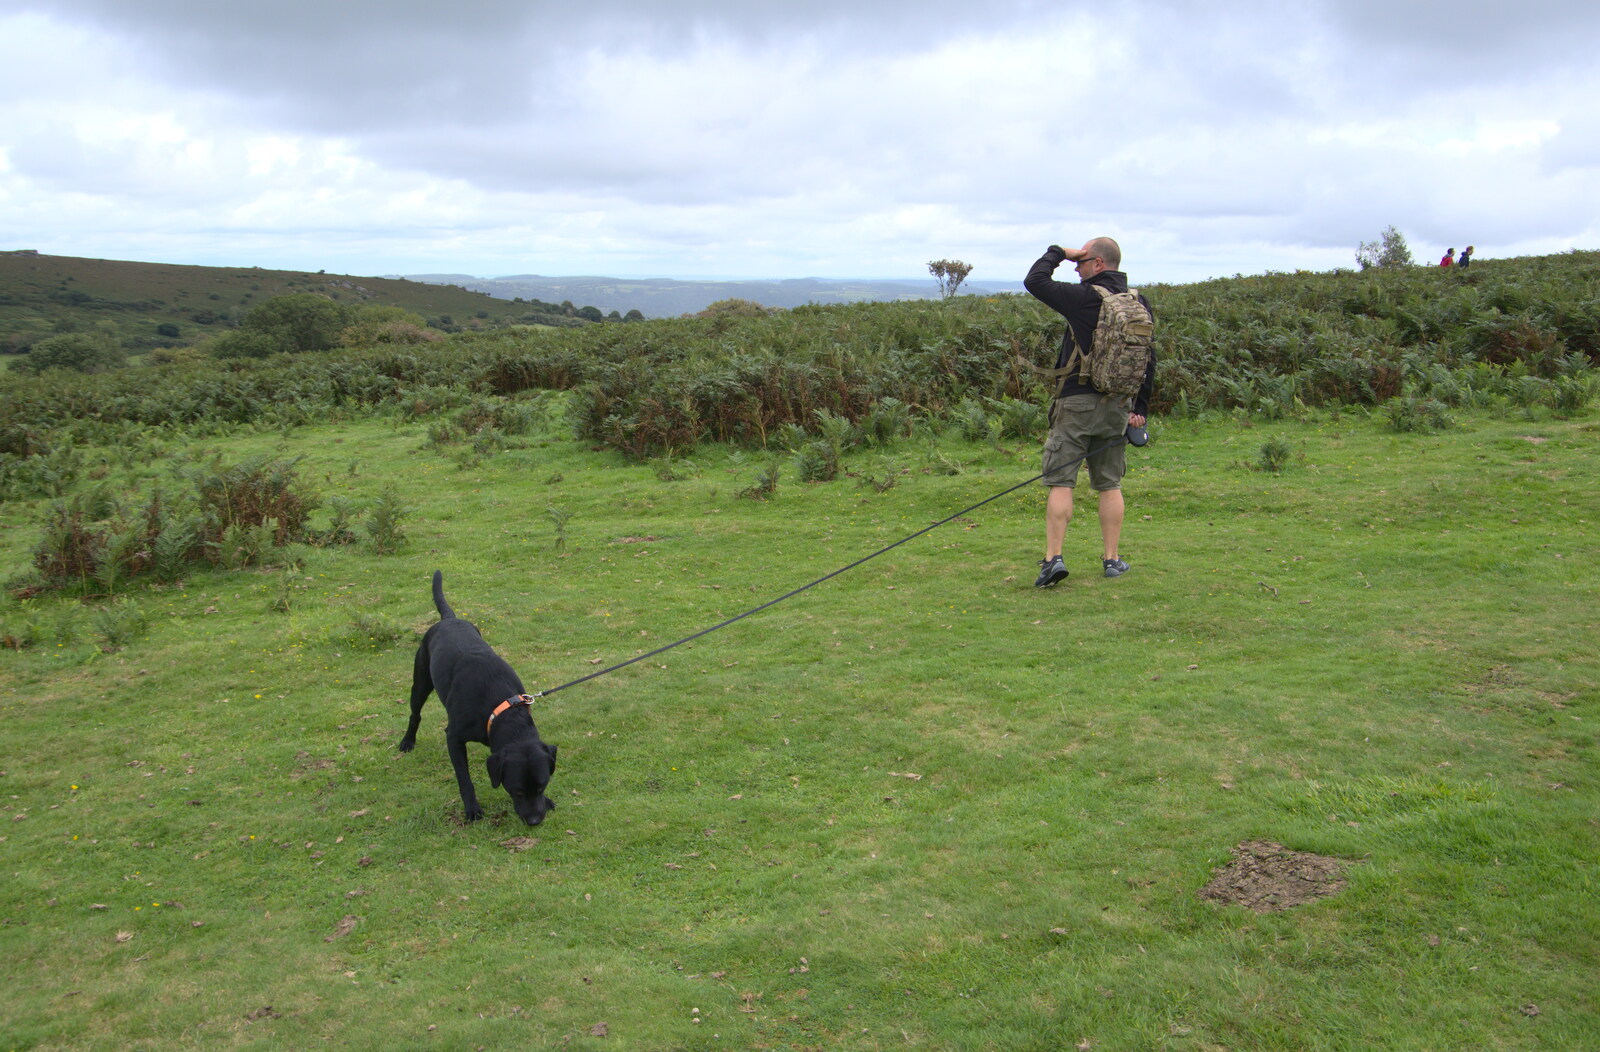 Doug's on a long lead from A Walk up Hound Tor, Dartmoor, Devon - 24th August 2020